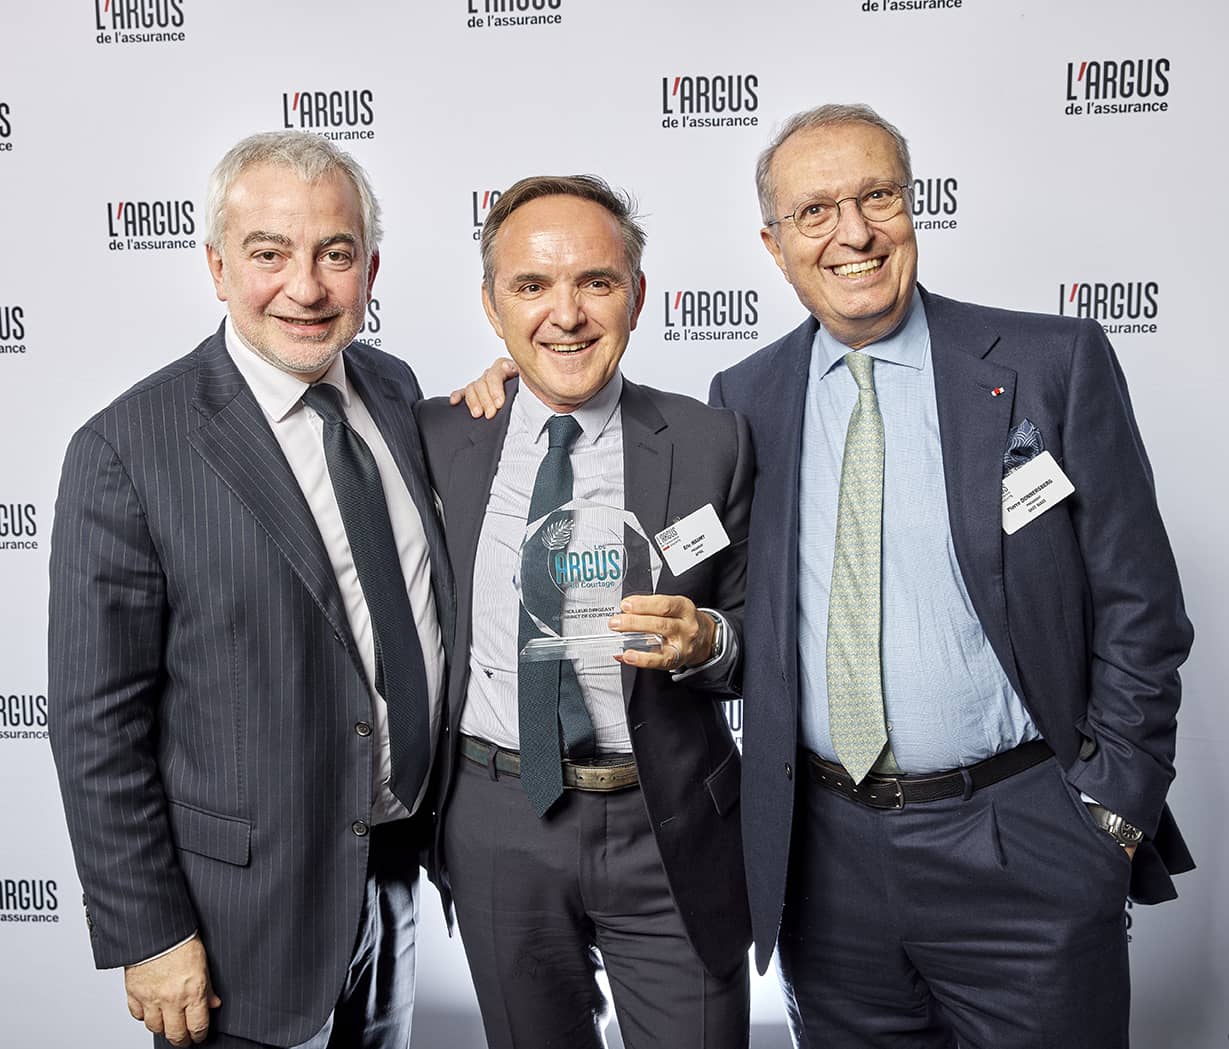 NewCo Corporate Finance handed the best brokerage firm manager trophy to Eric Maumy at the 2nd edition of the Argus du courtage